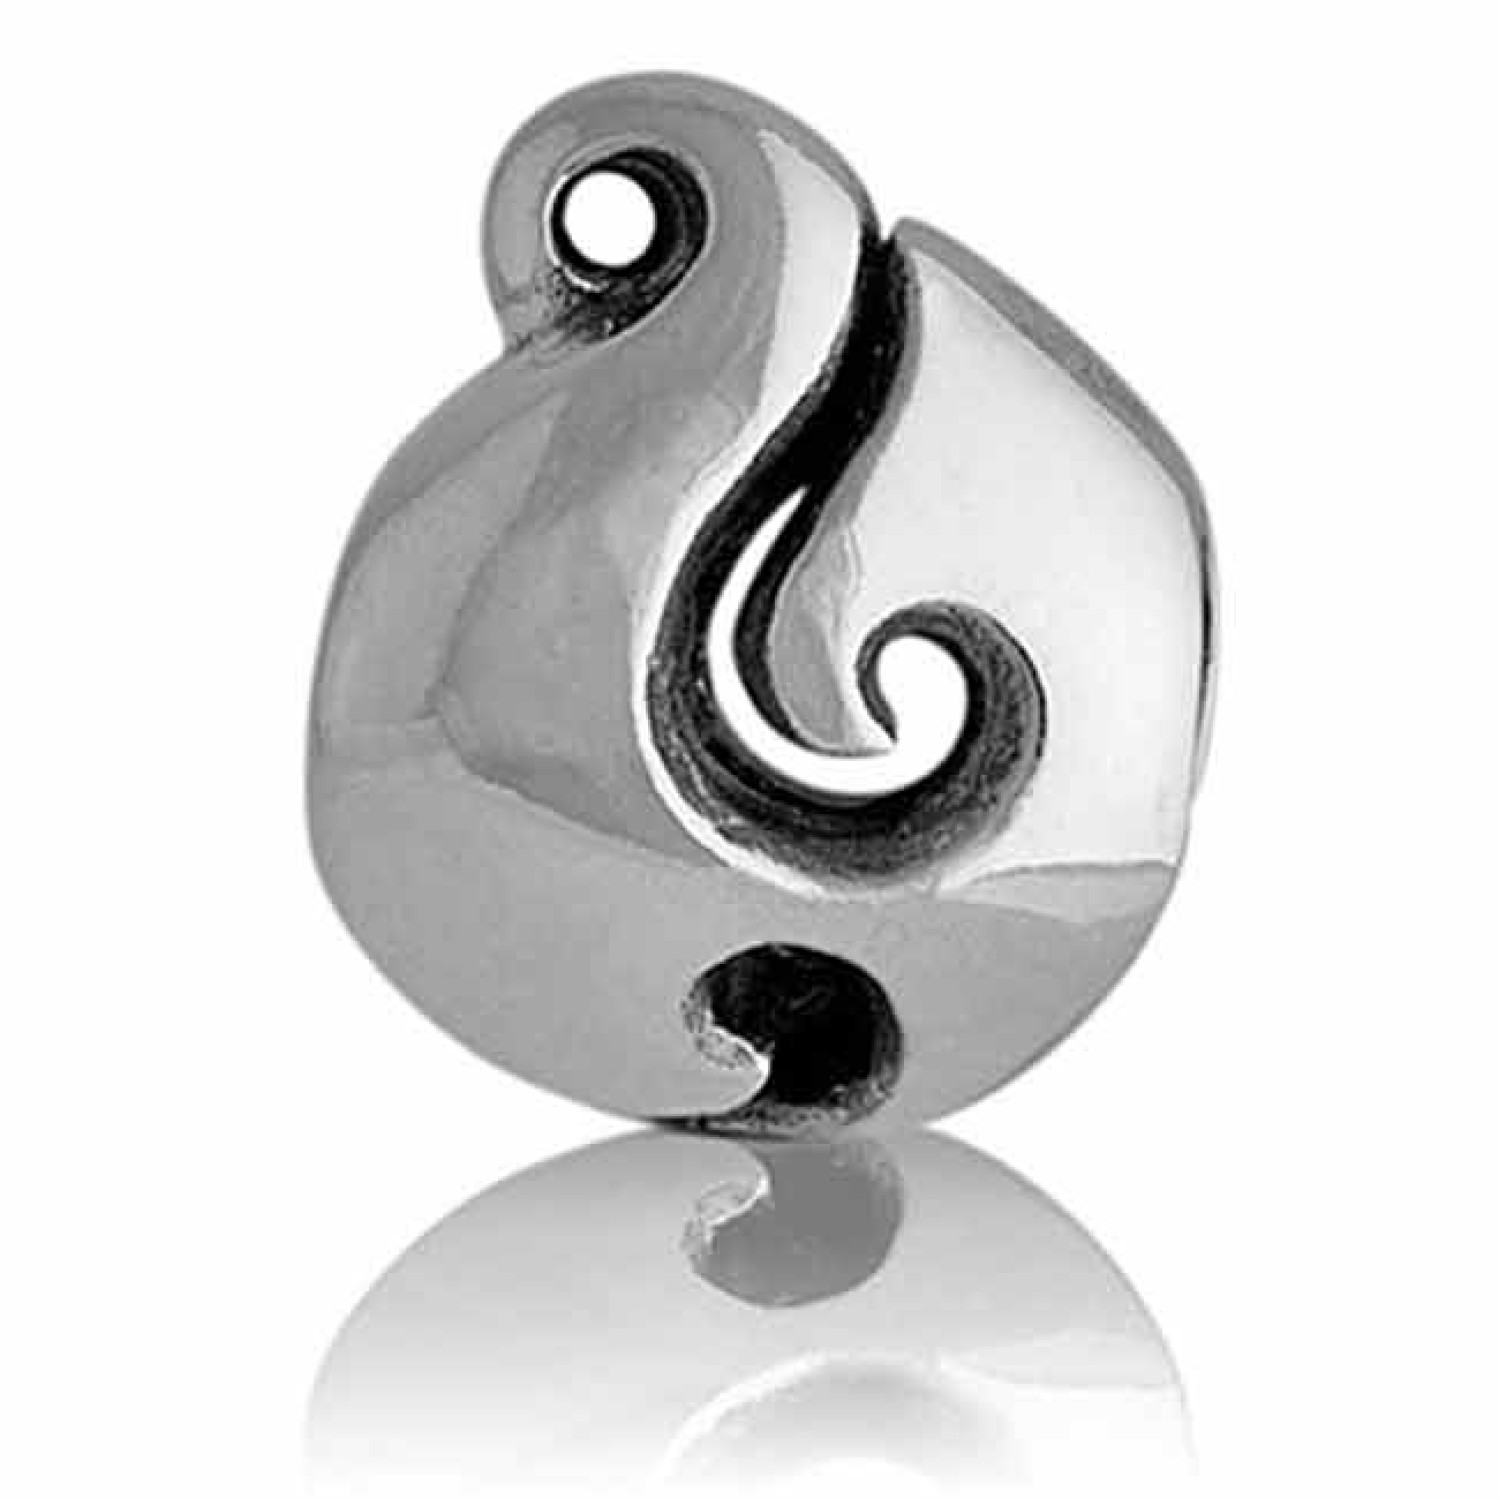 LK002 NZ Fish Hook - Strength. Maori legend tells of a great leader Maui who bravely fished up New Zealand’s North Island (Te Ika a Maui - ‘The Fish of Maui’) using his grandmothers jaw bone as a fish hook.  To honour this well known Maori story @christie